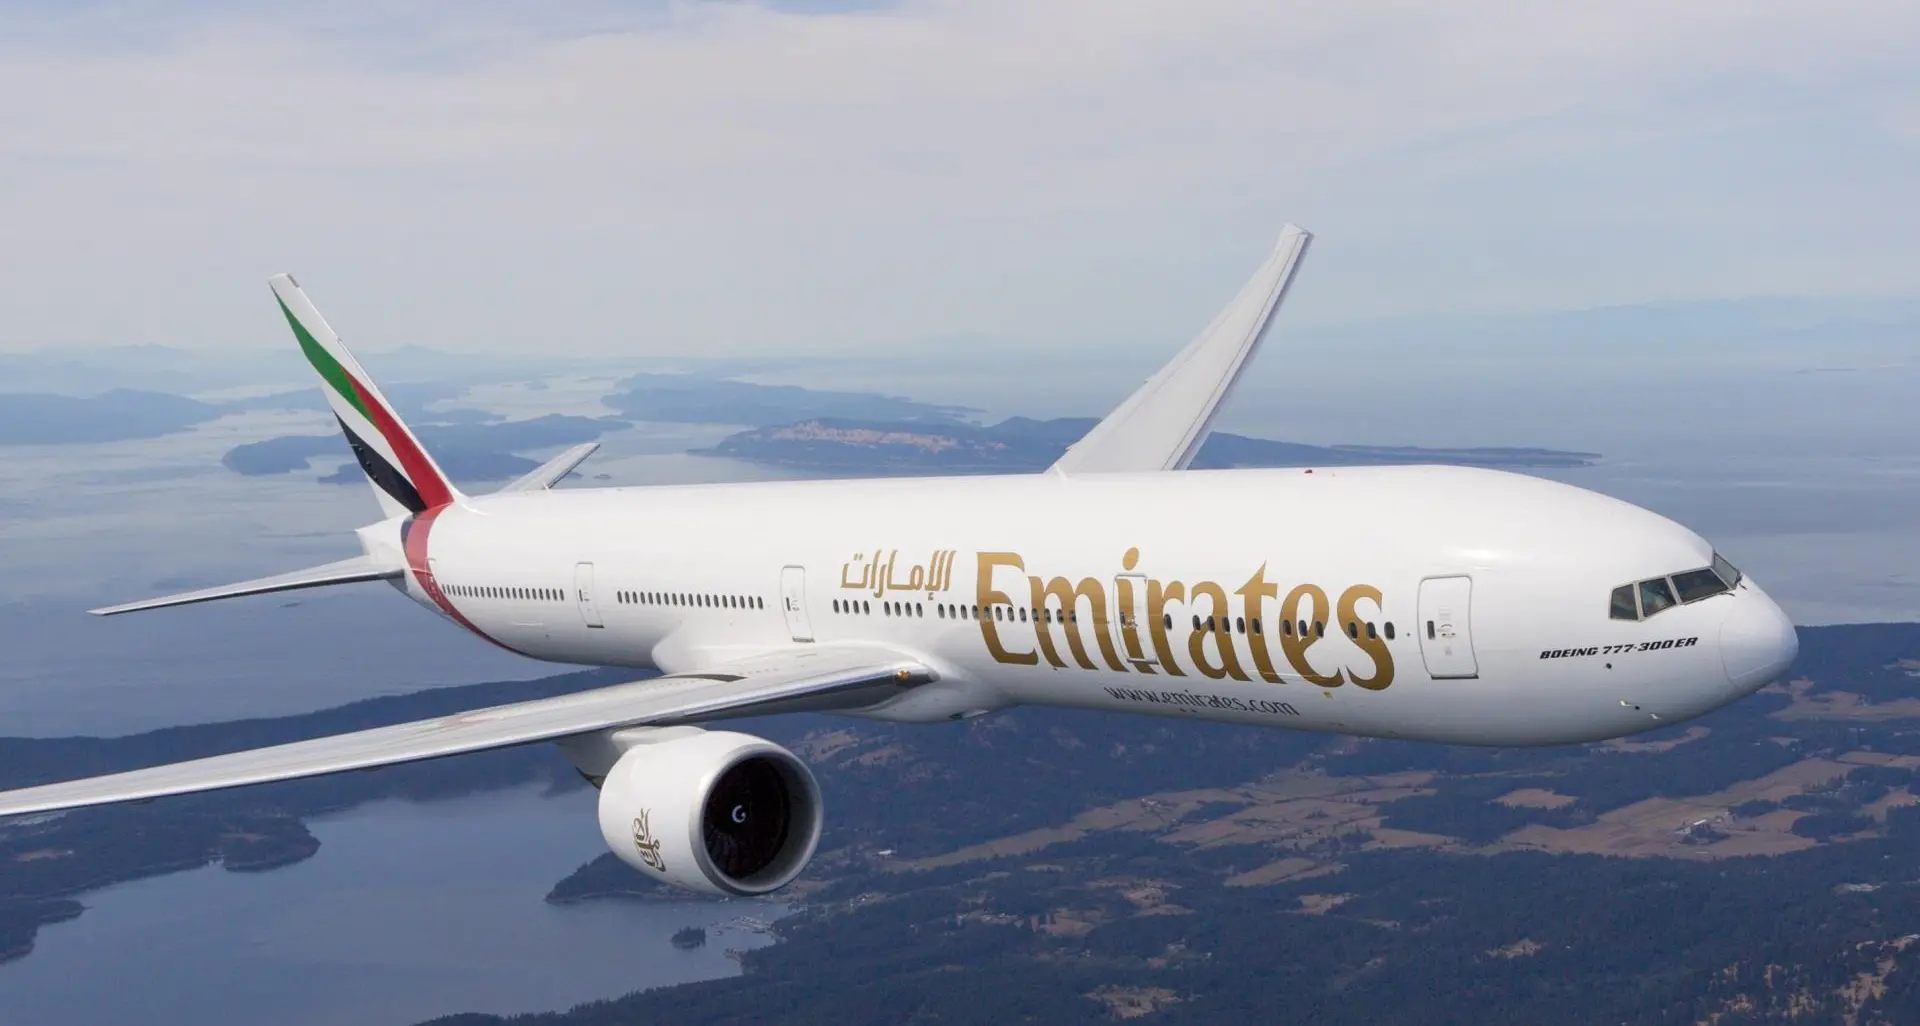 Dubai's Emirates to restart flights to London Gatwick with daily service in December